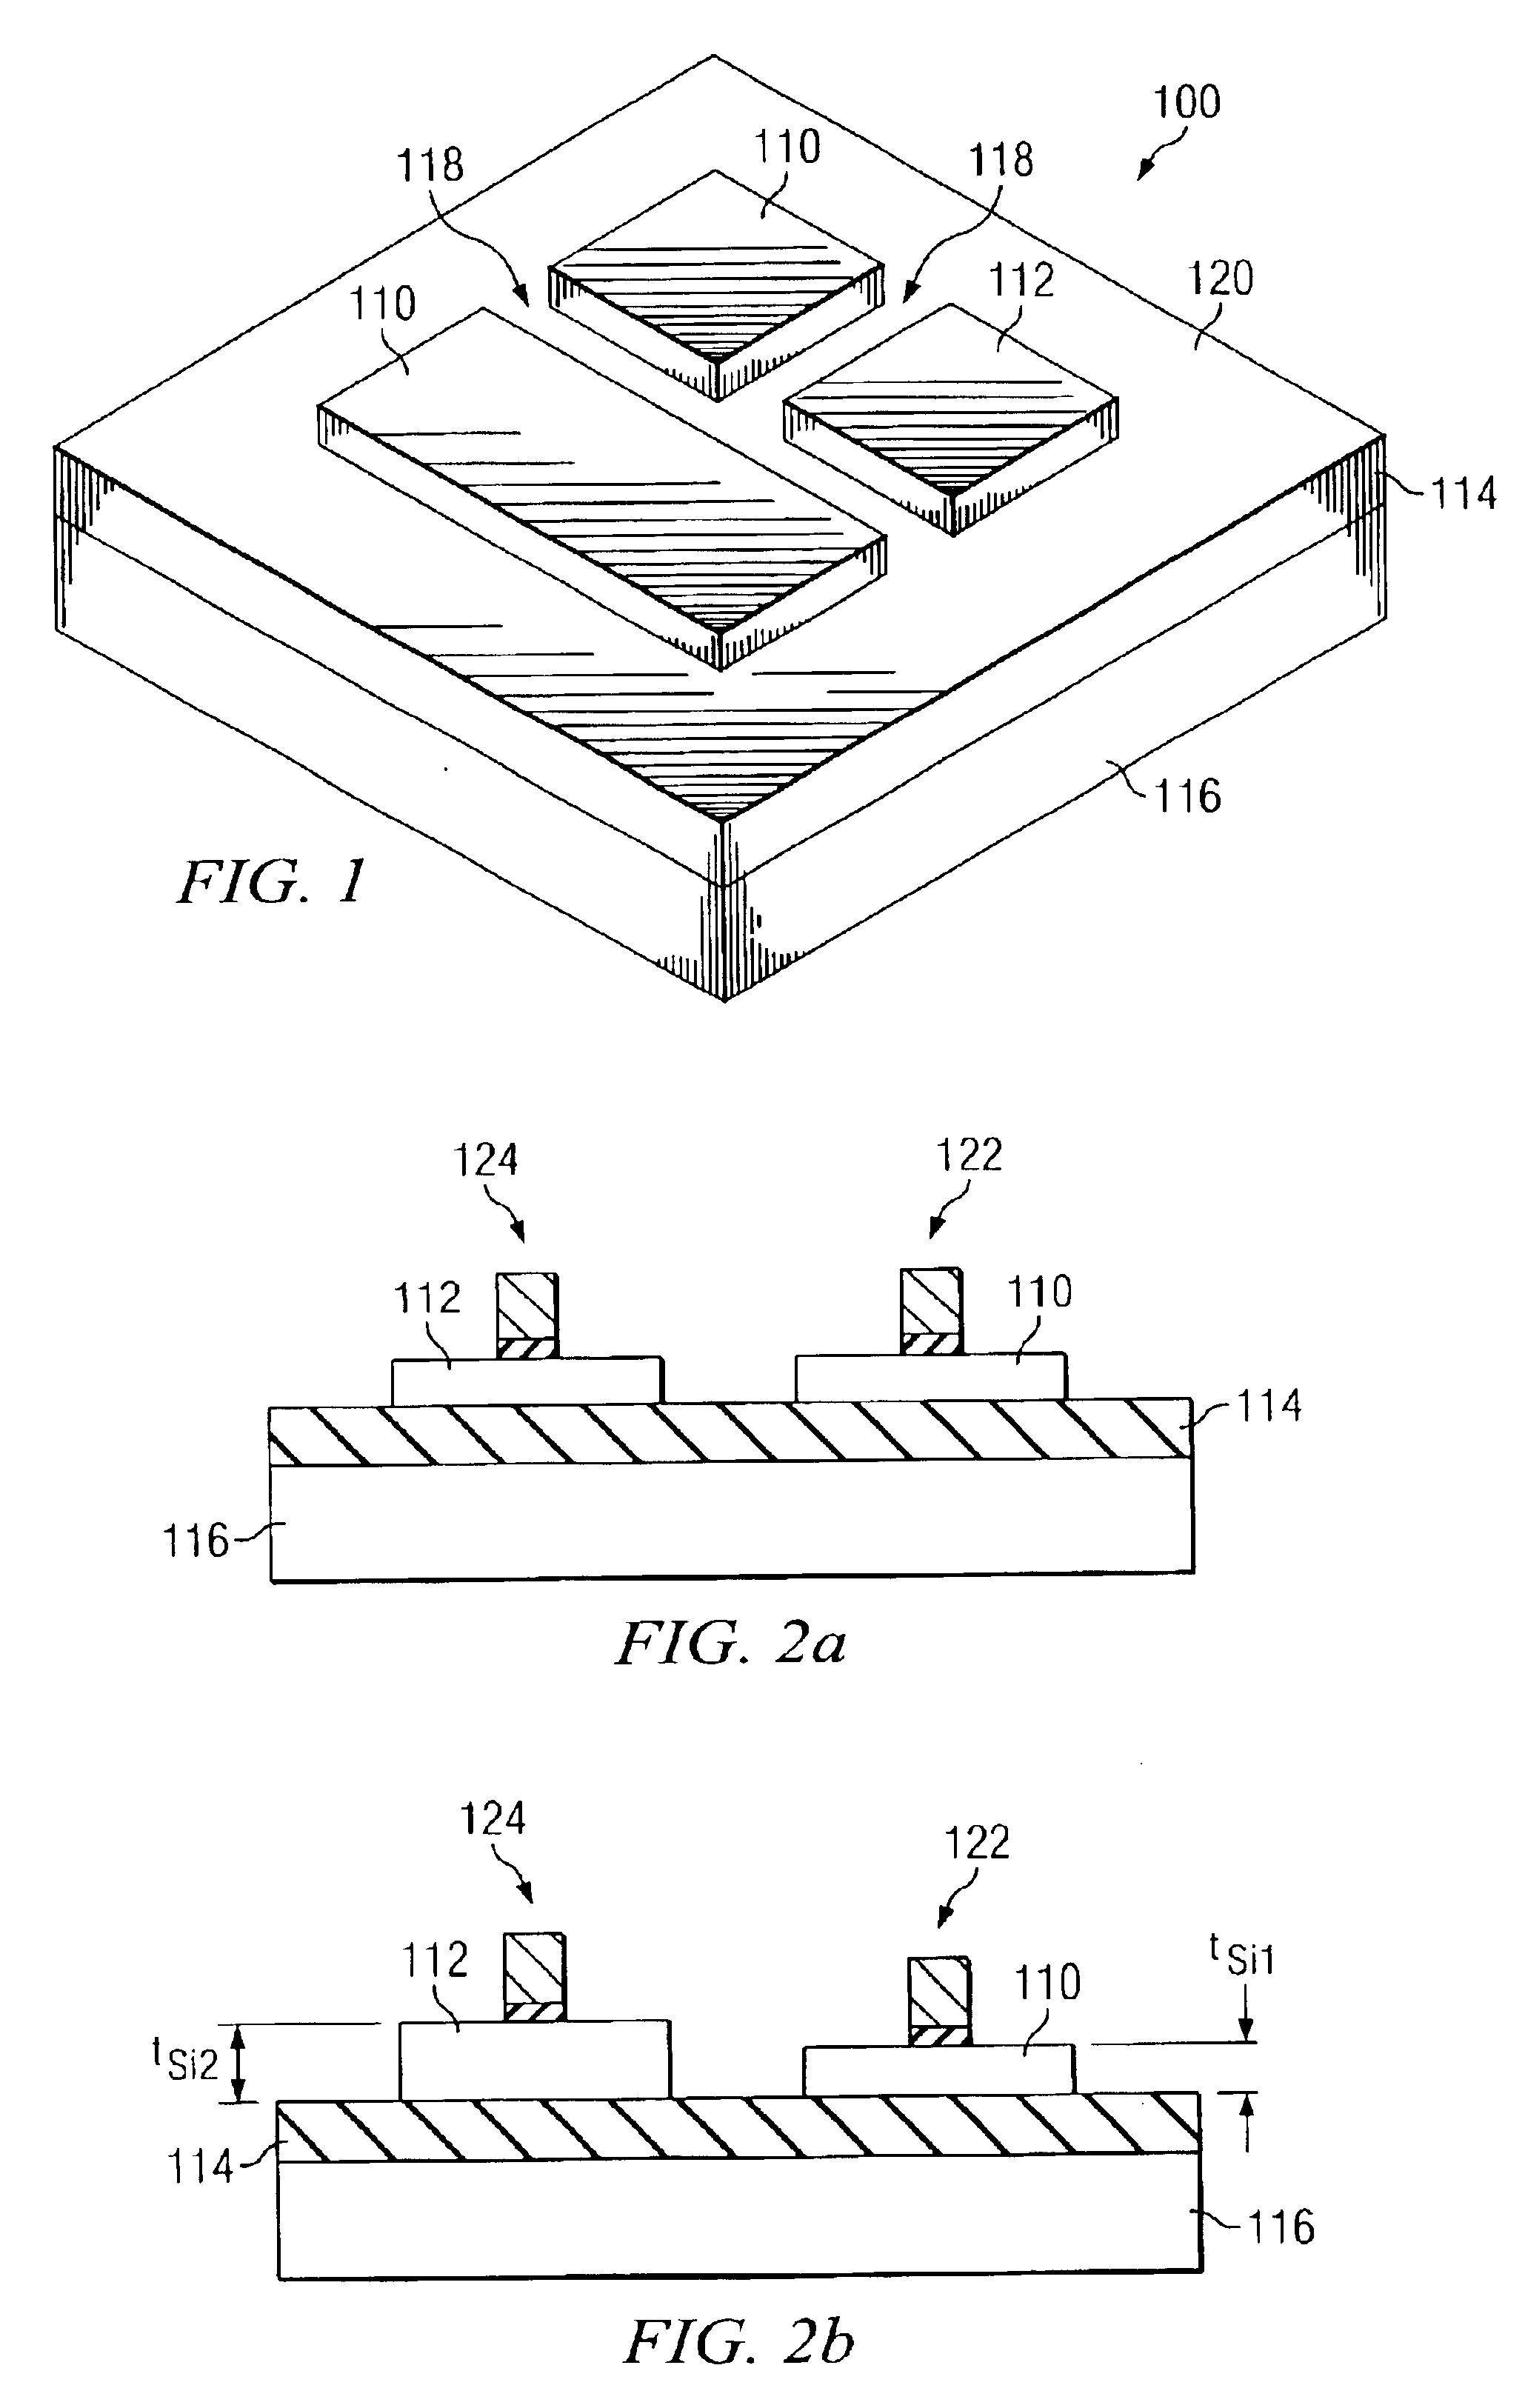 Silicon-on-insulator chip with multiple crystal orientations